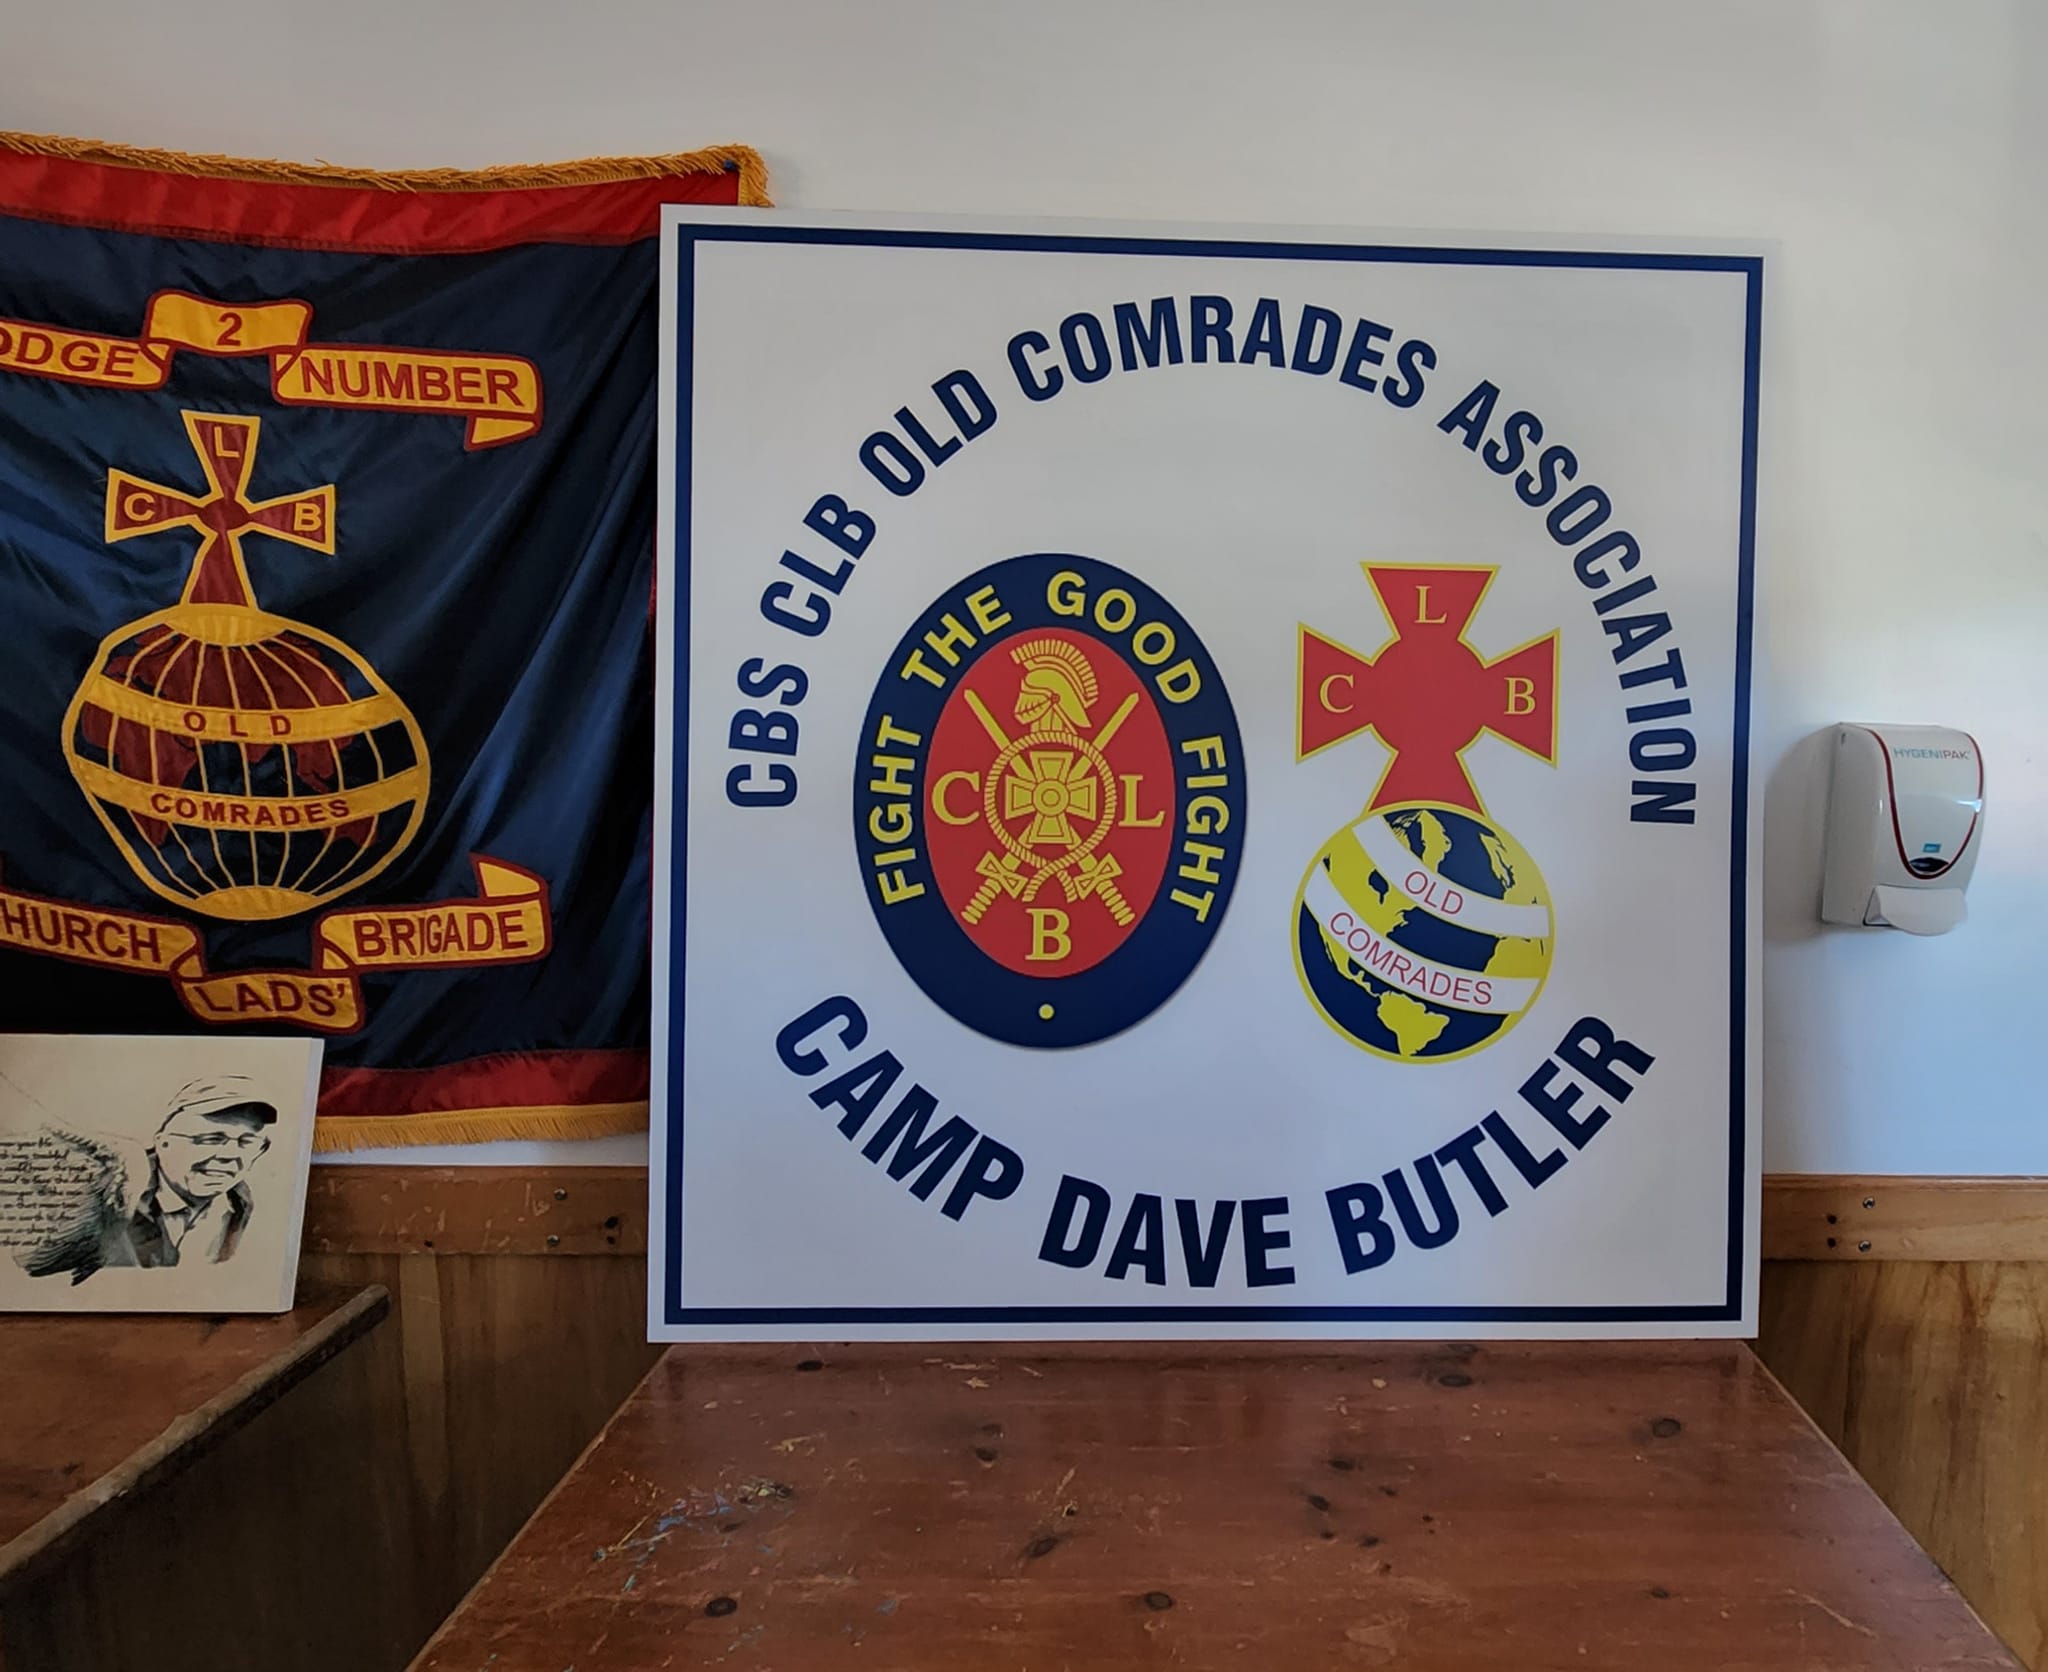 The new Camp Dave Butler building signage, along with the Old Comrades's Colours